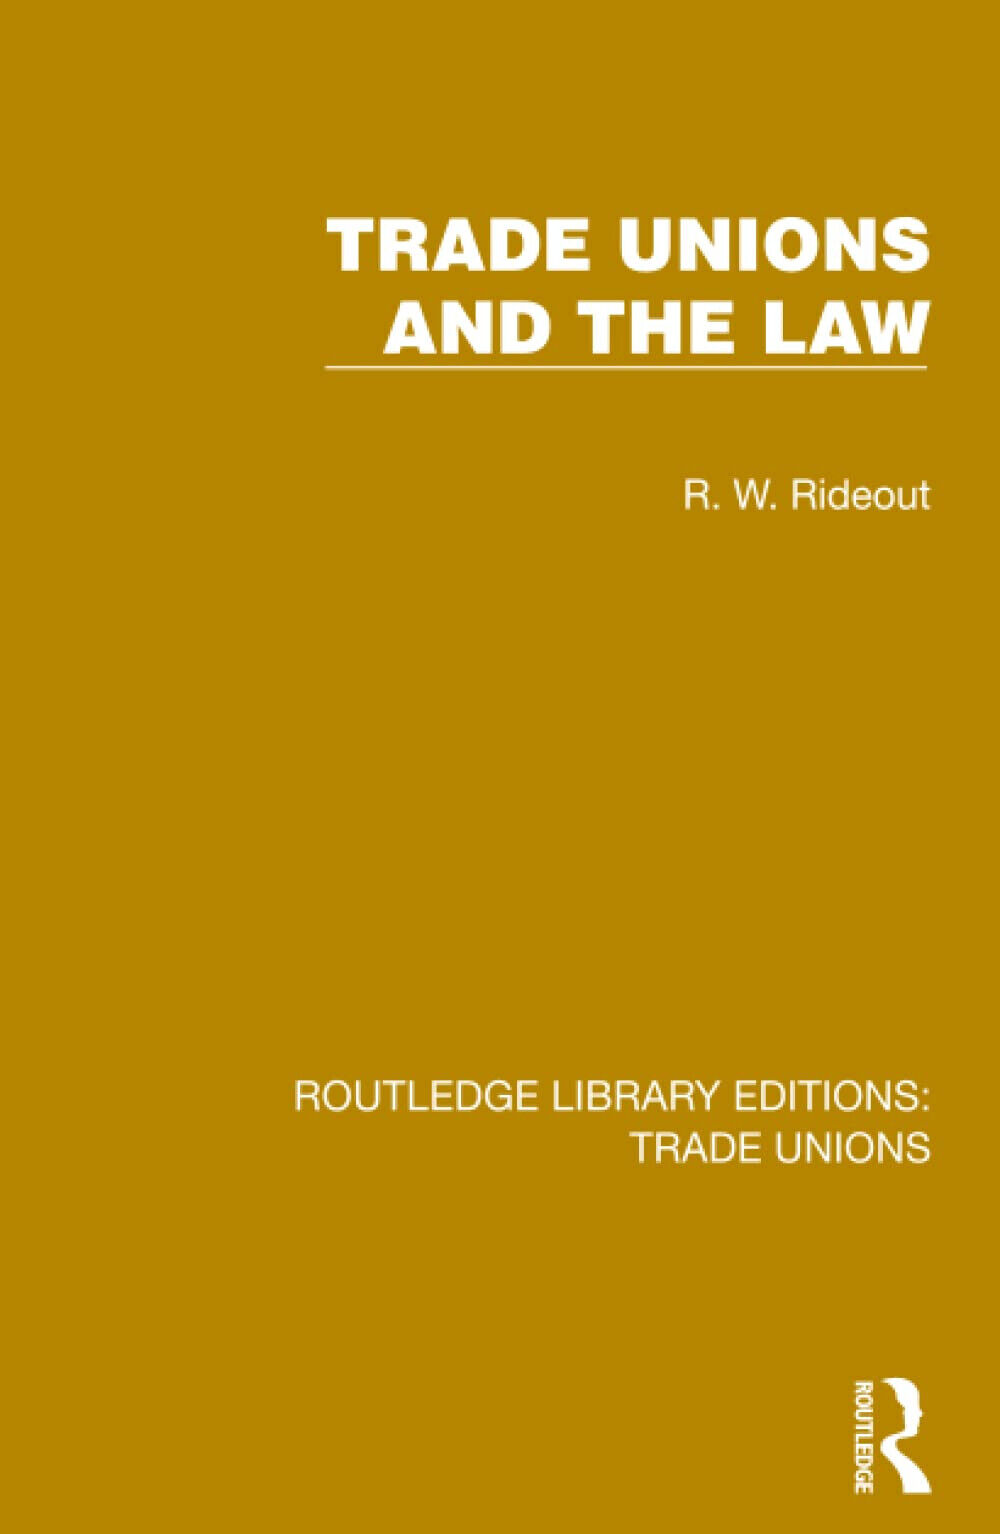 Trade Unions And The Law - R. W. Rideout - Routledge, 2022